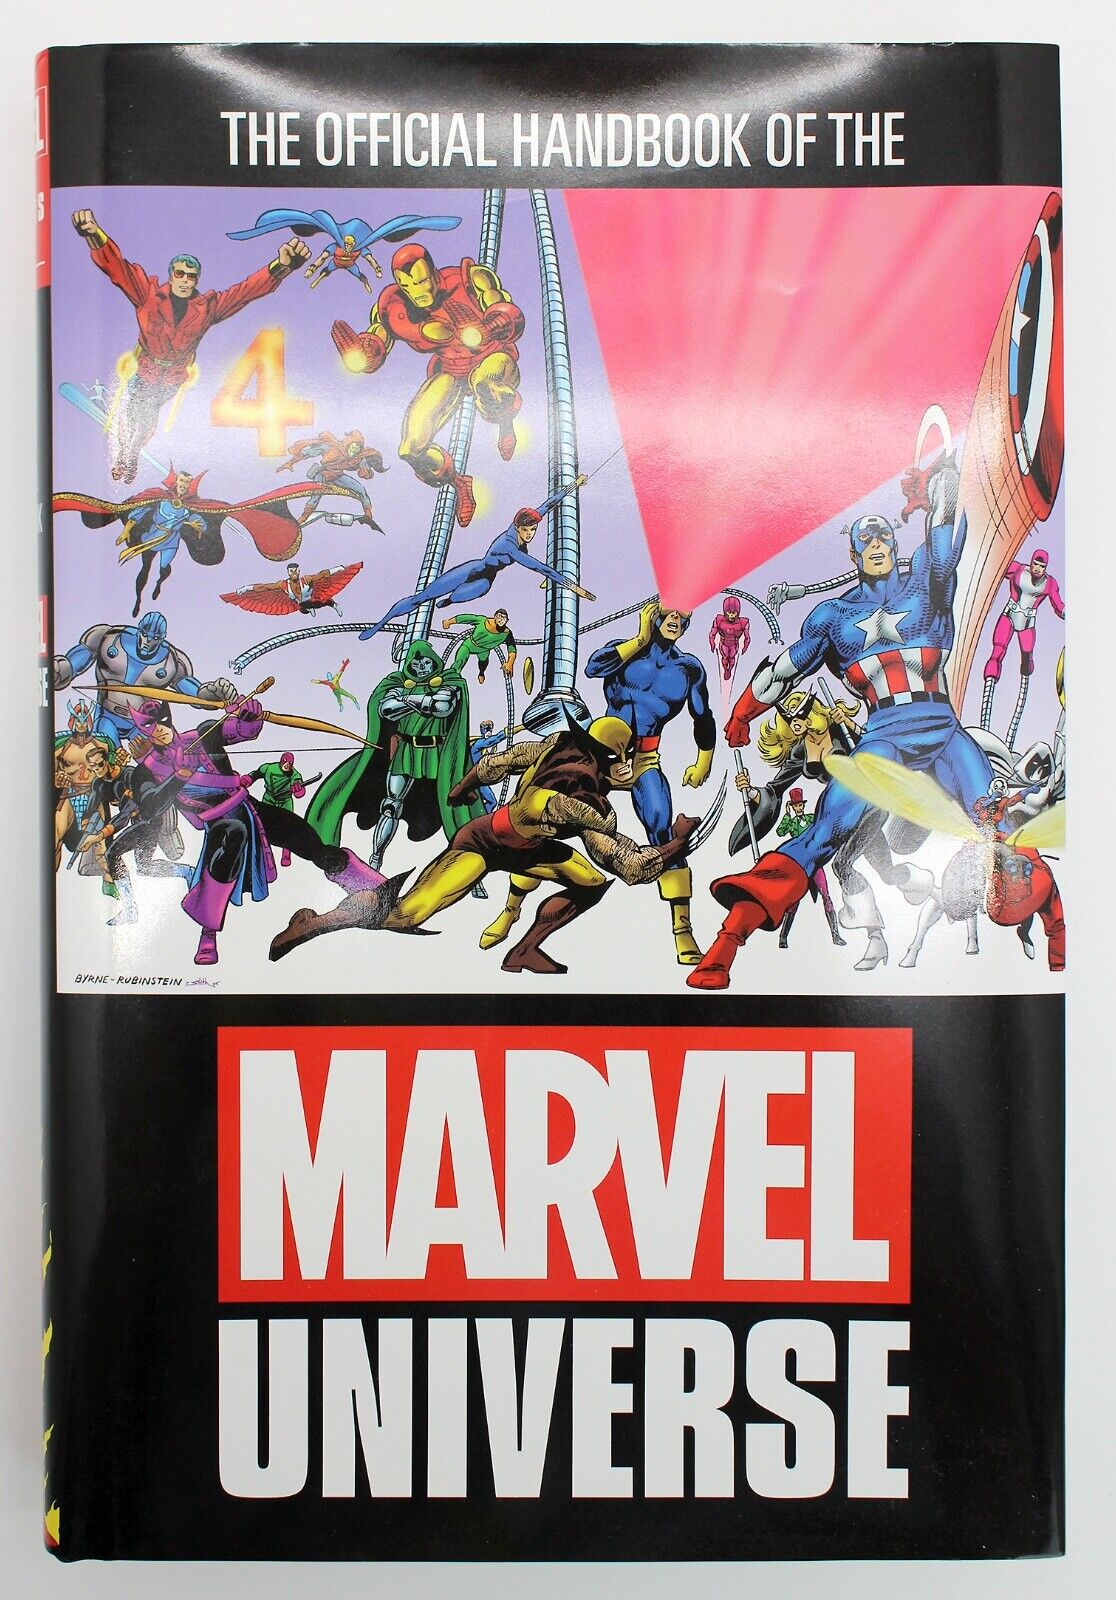 Official Handbook of the Marvel Universe Omnibus Hardcover, 2019